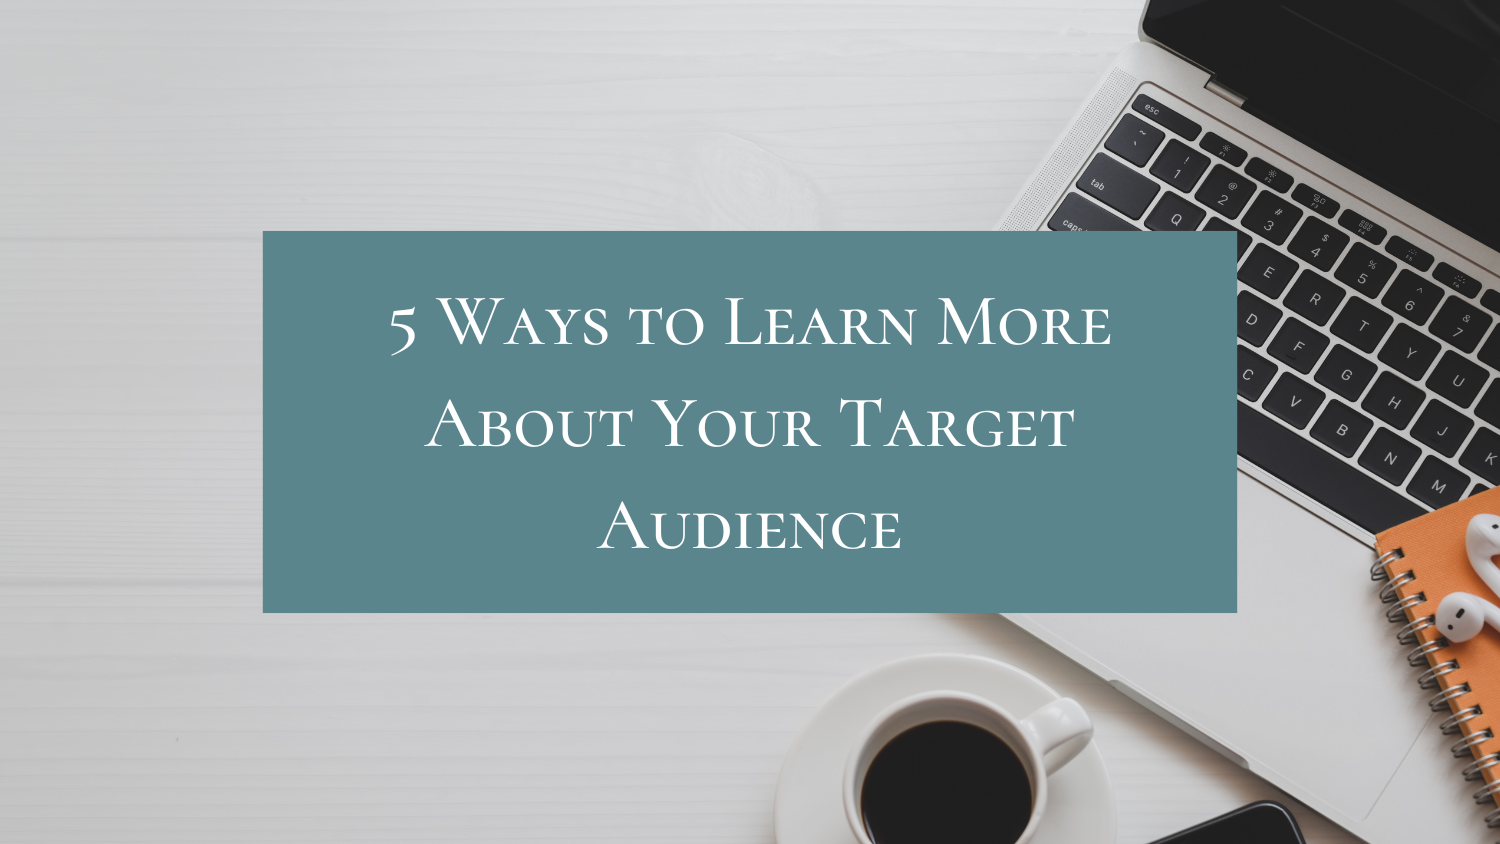 5 Ways to Learn More About Your Target Audience